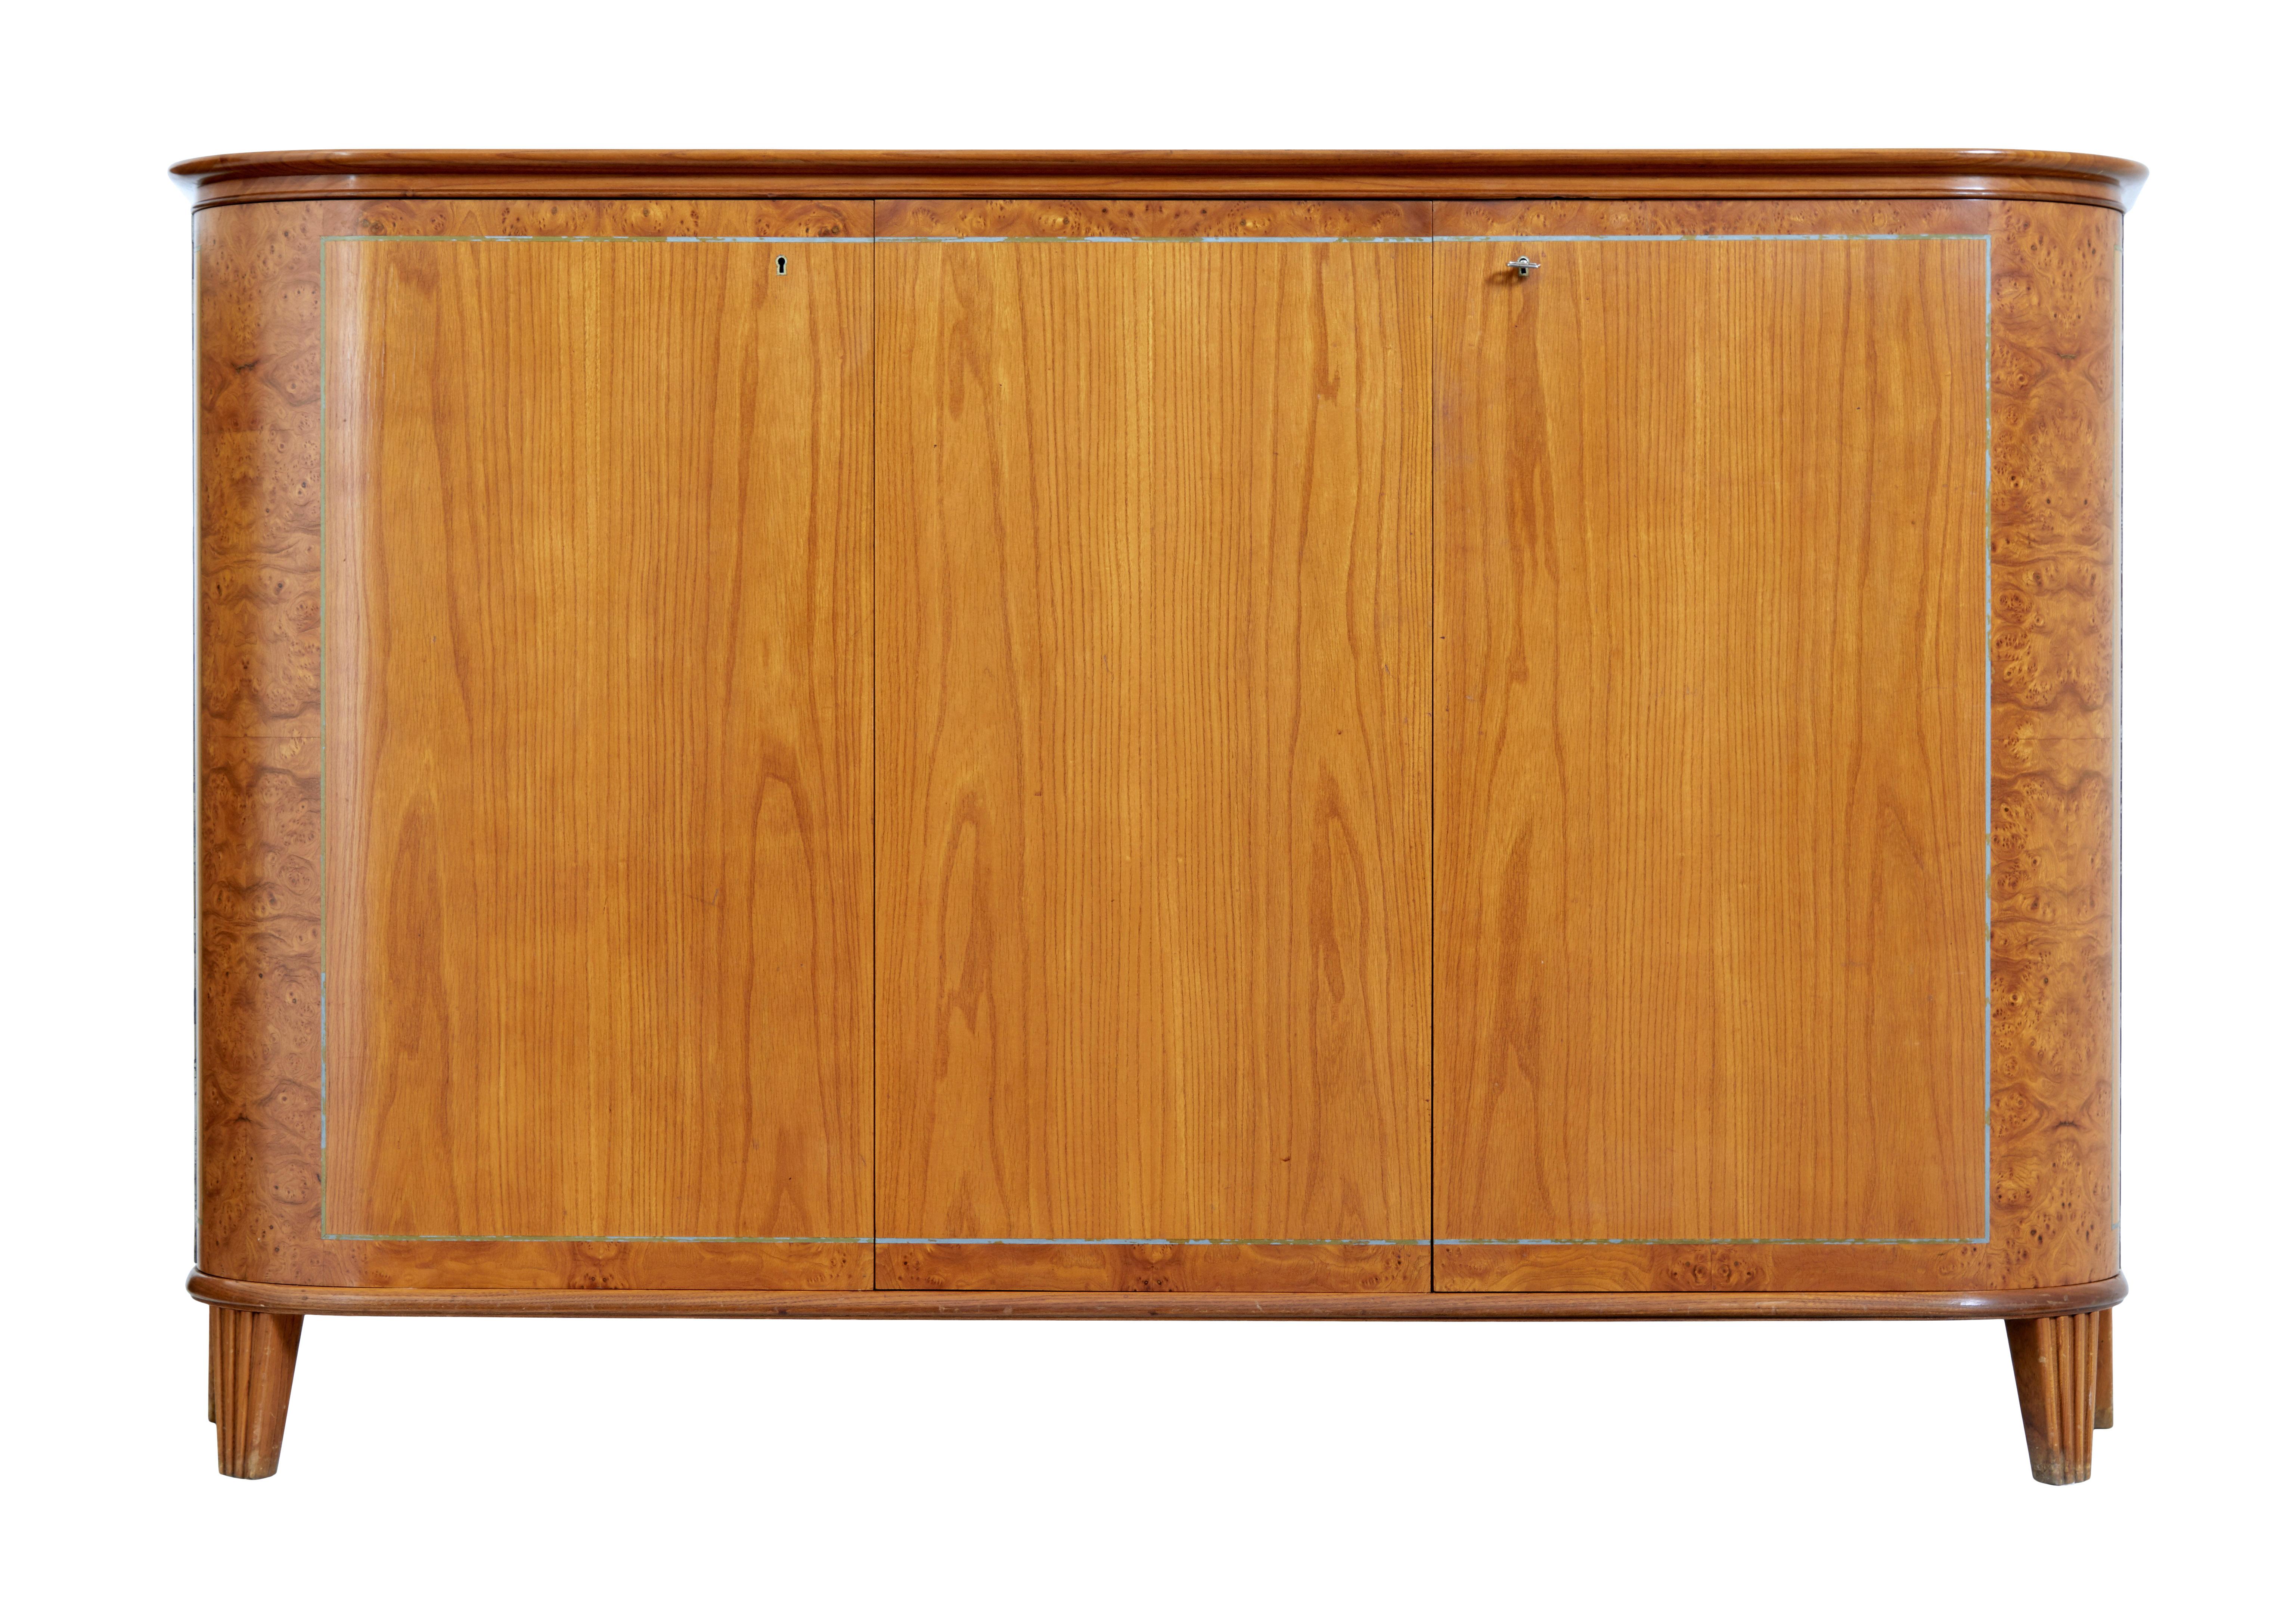 Mid century elm sideboard by thysells mobler circa 1950.

Popular model by well know maker thysells mobler, this sideboard being different from the norm being made in elm with masurian birch cross banding.

Rounded shaped top surface with